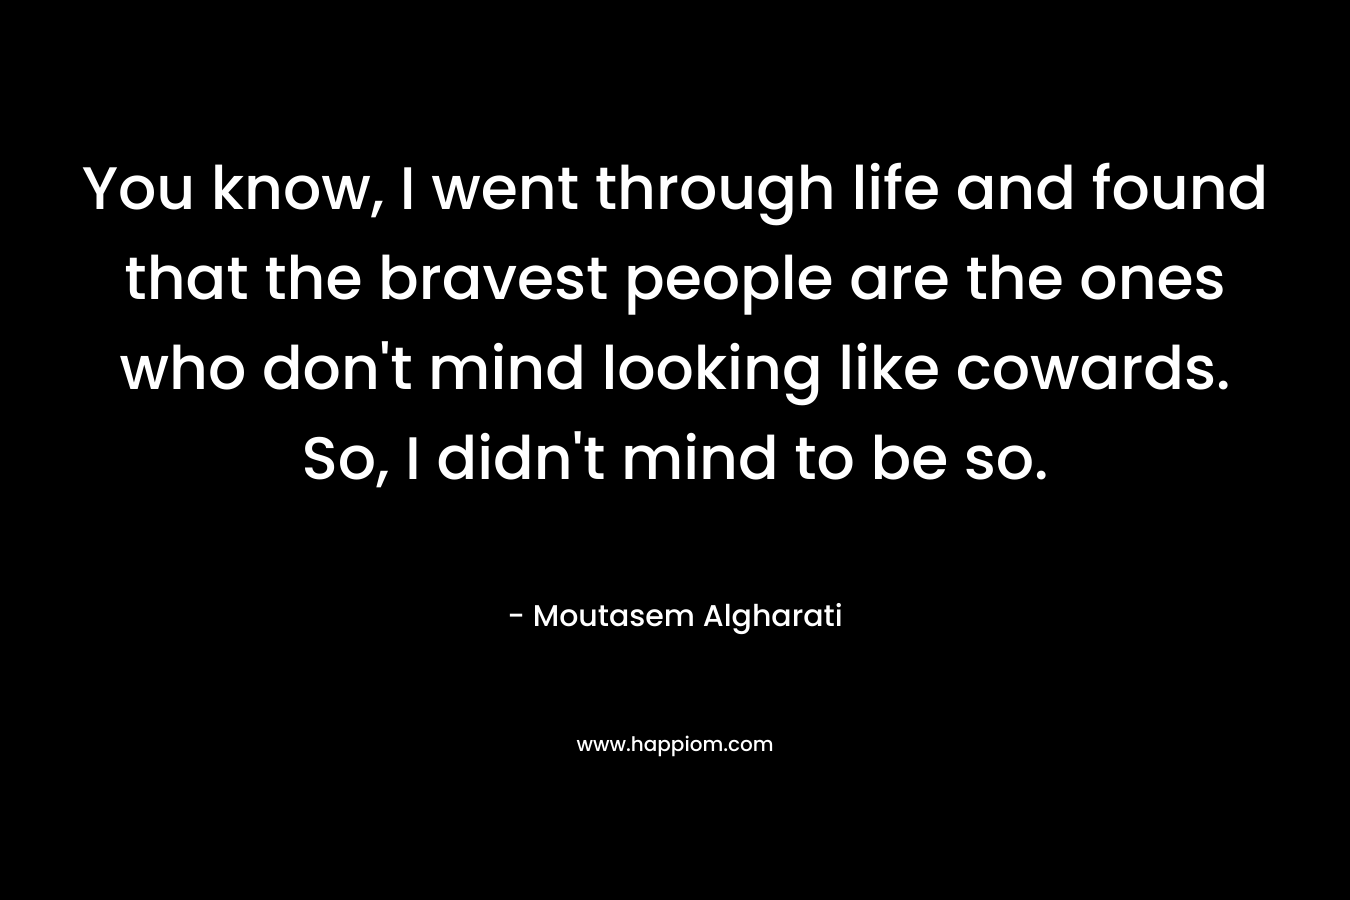 You know, I went through life and found that the bravest people are the ones who don’t mind looking like cowards. So, I didn’t mind to be so. – Moutasem Algharati